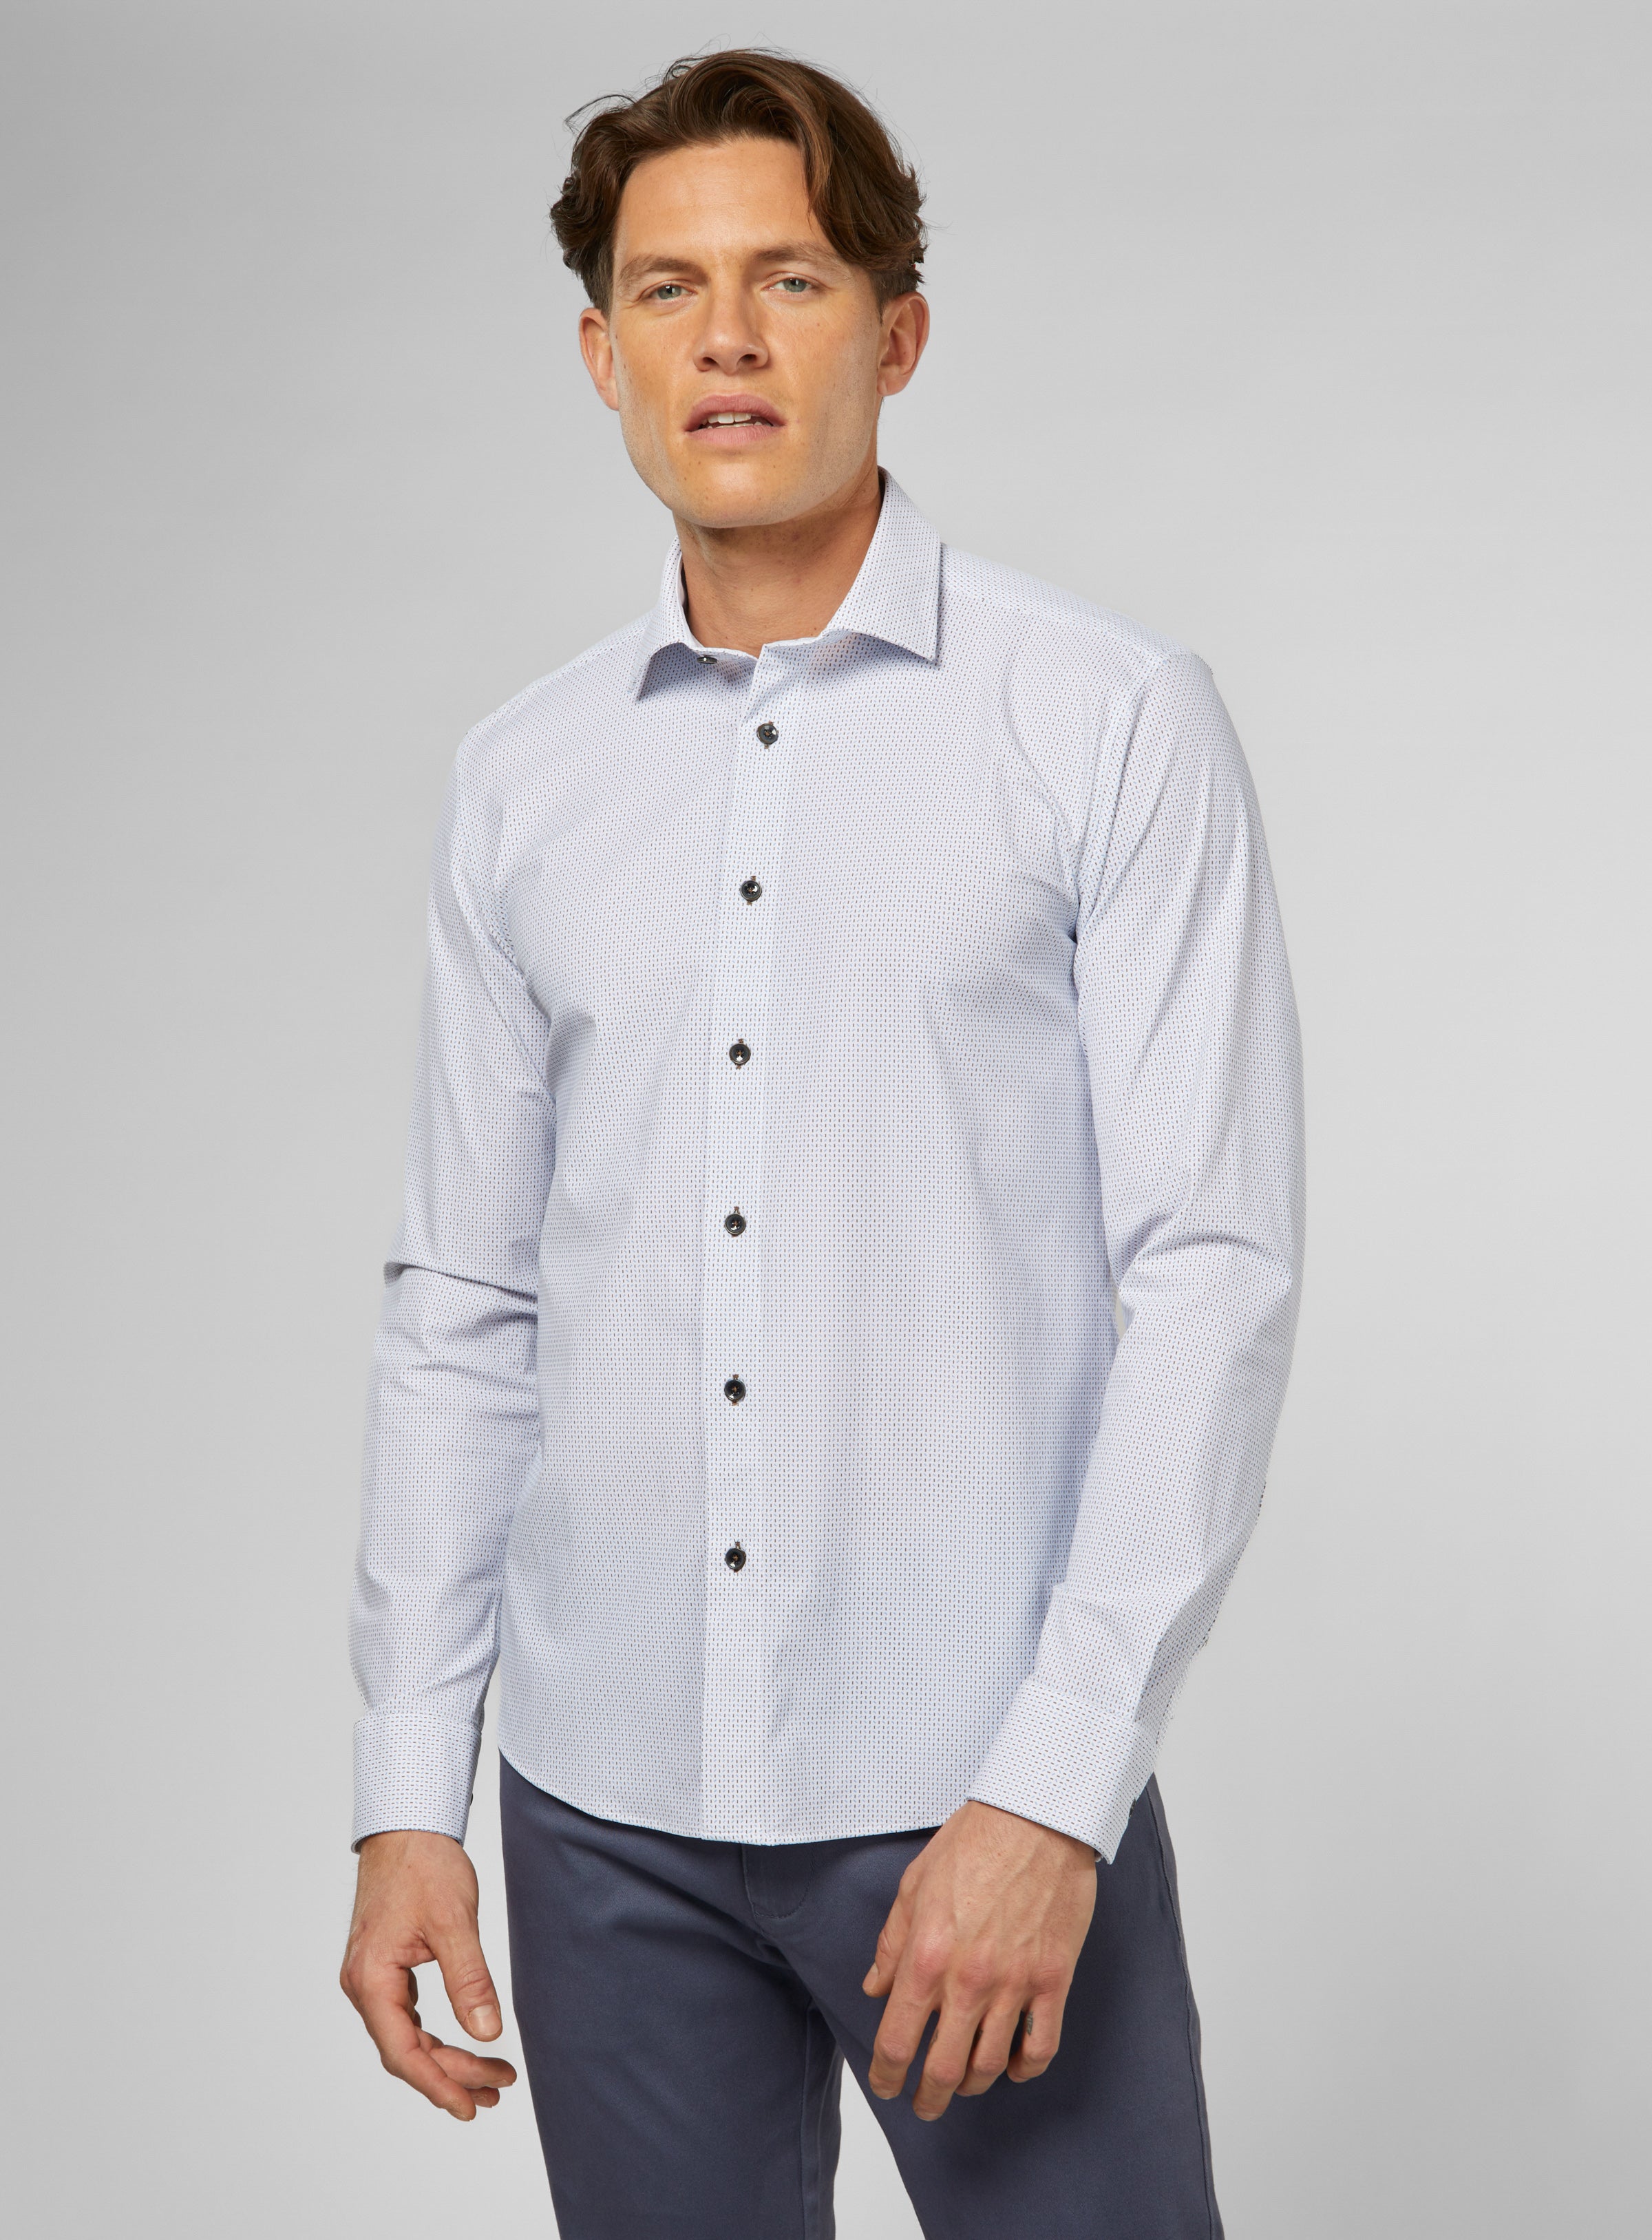 Micro Print Stretch Shirt for men - Anthony of London